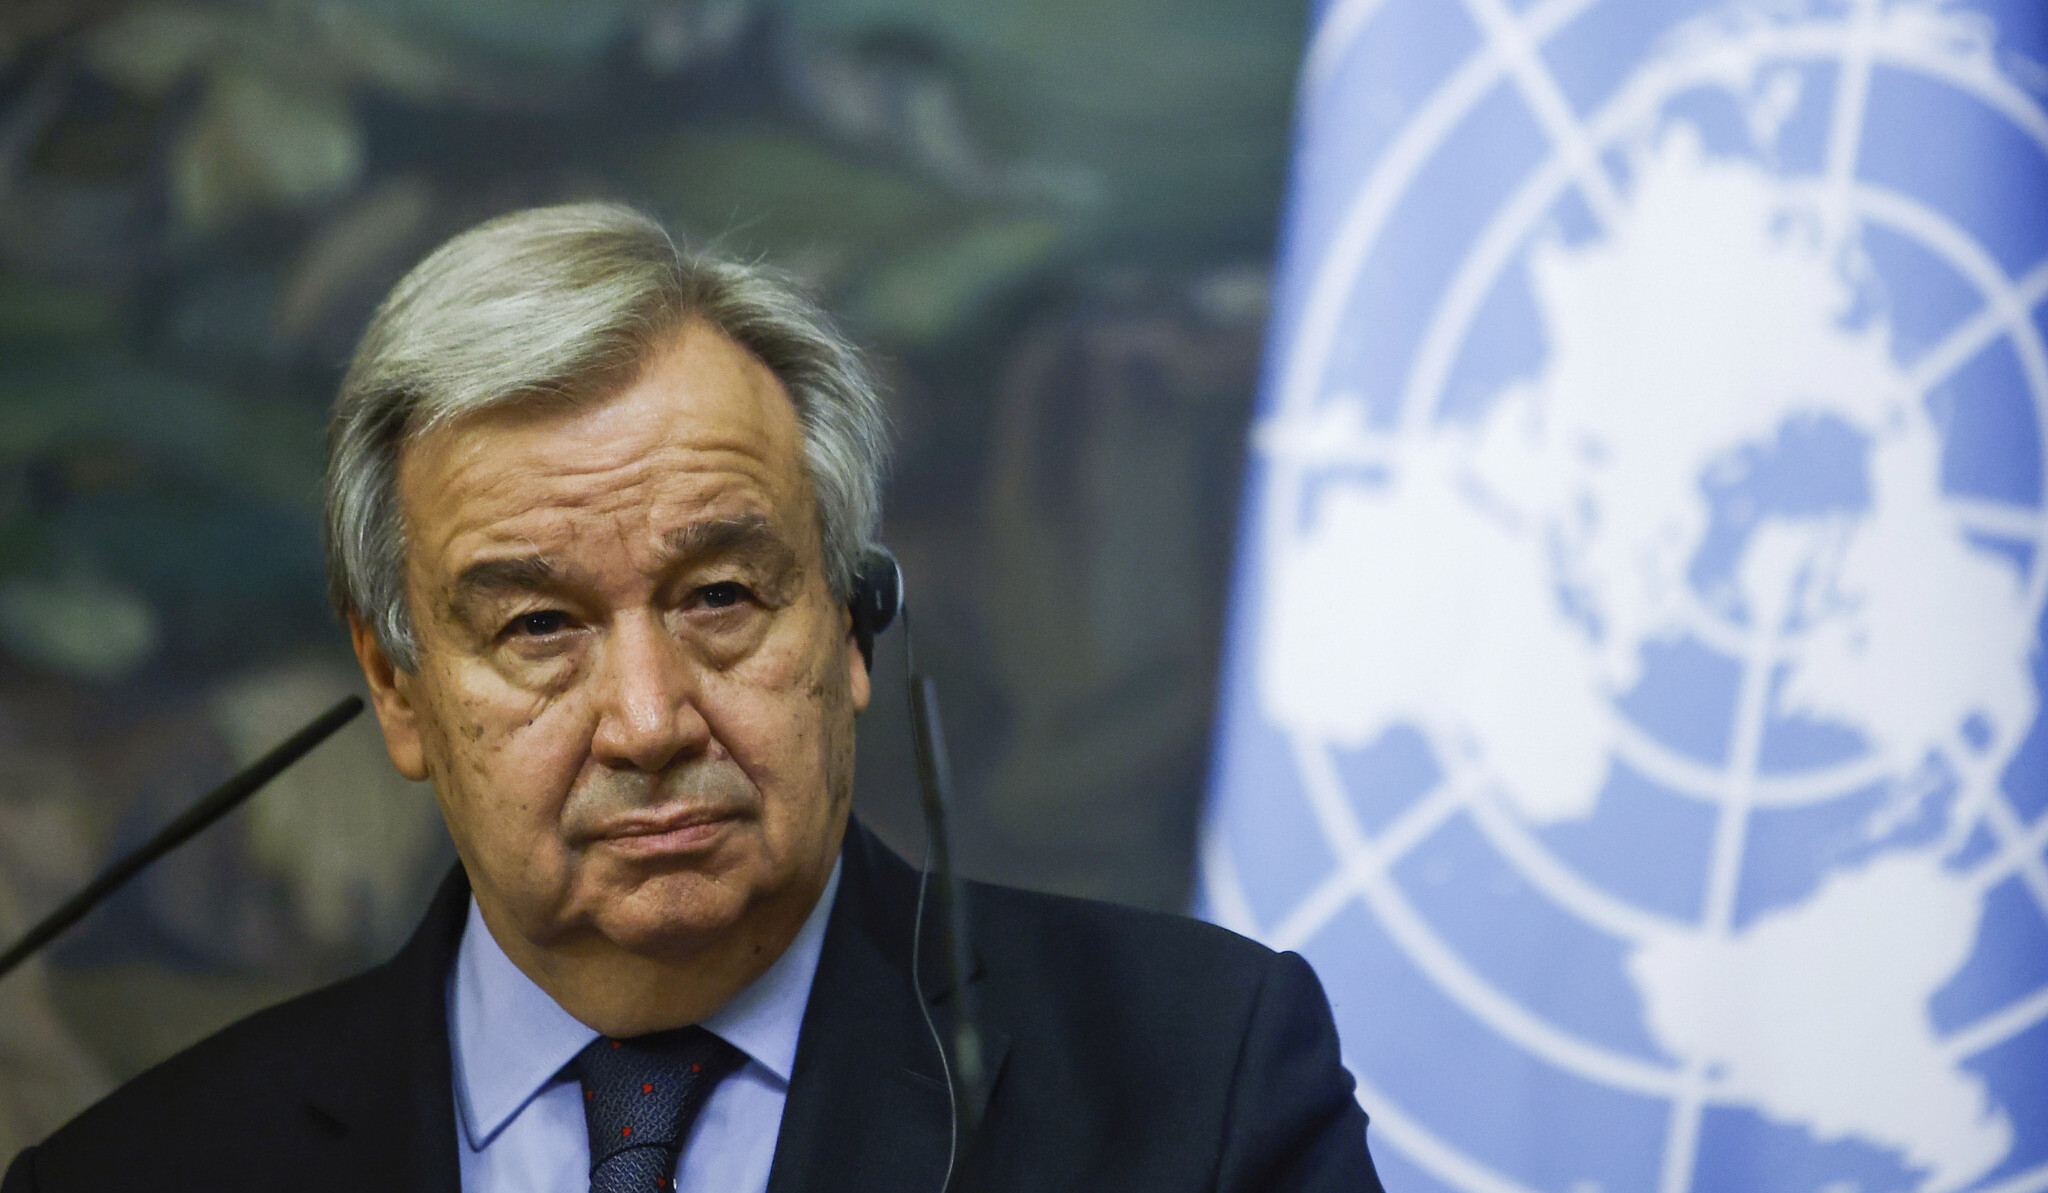 Guterres referred to murder of members of World Central Kitchen group